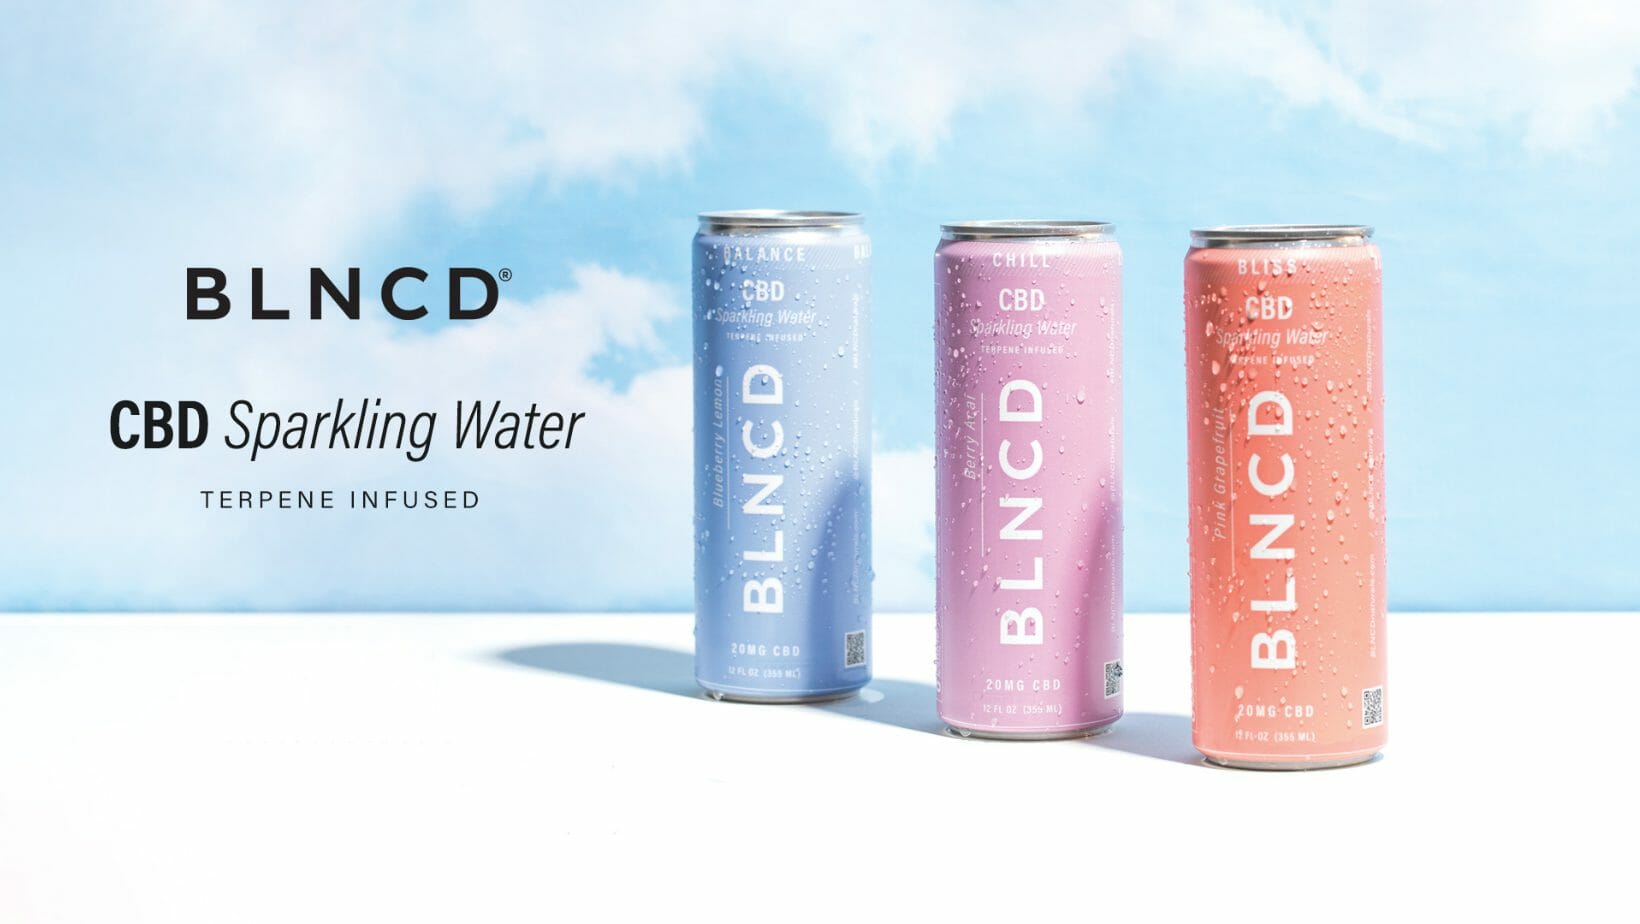 BLNCD sparkling waters